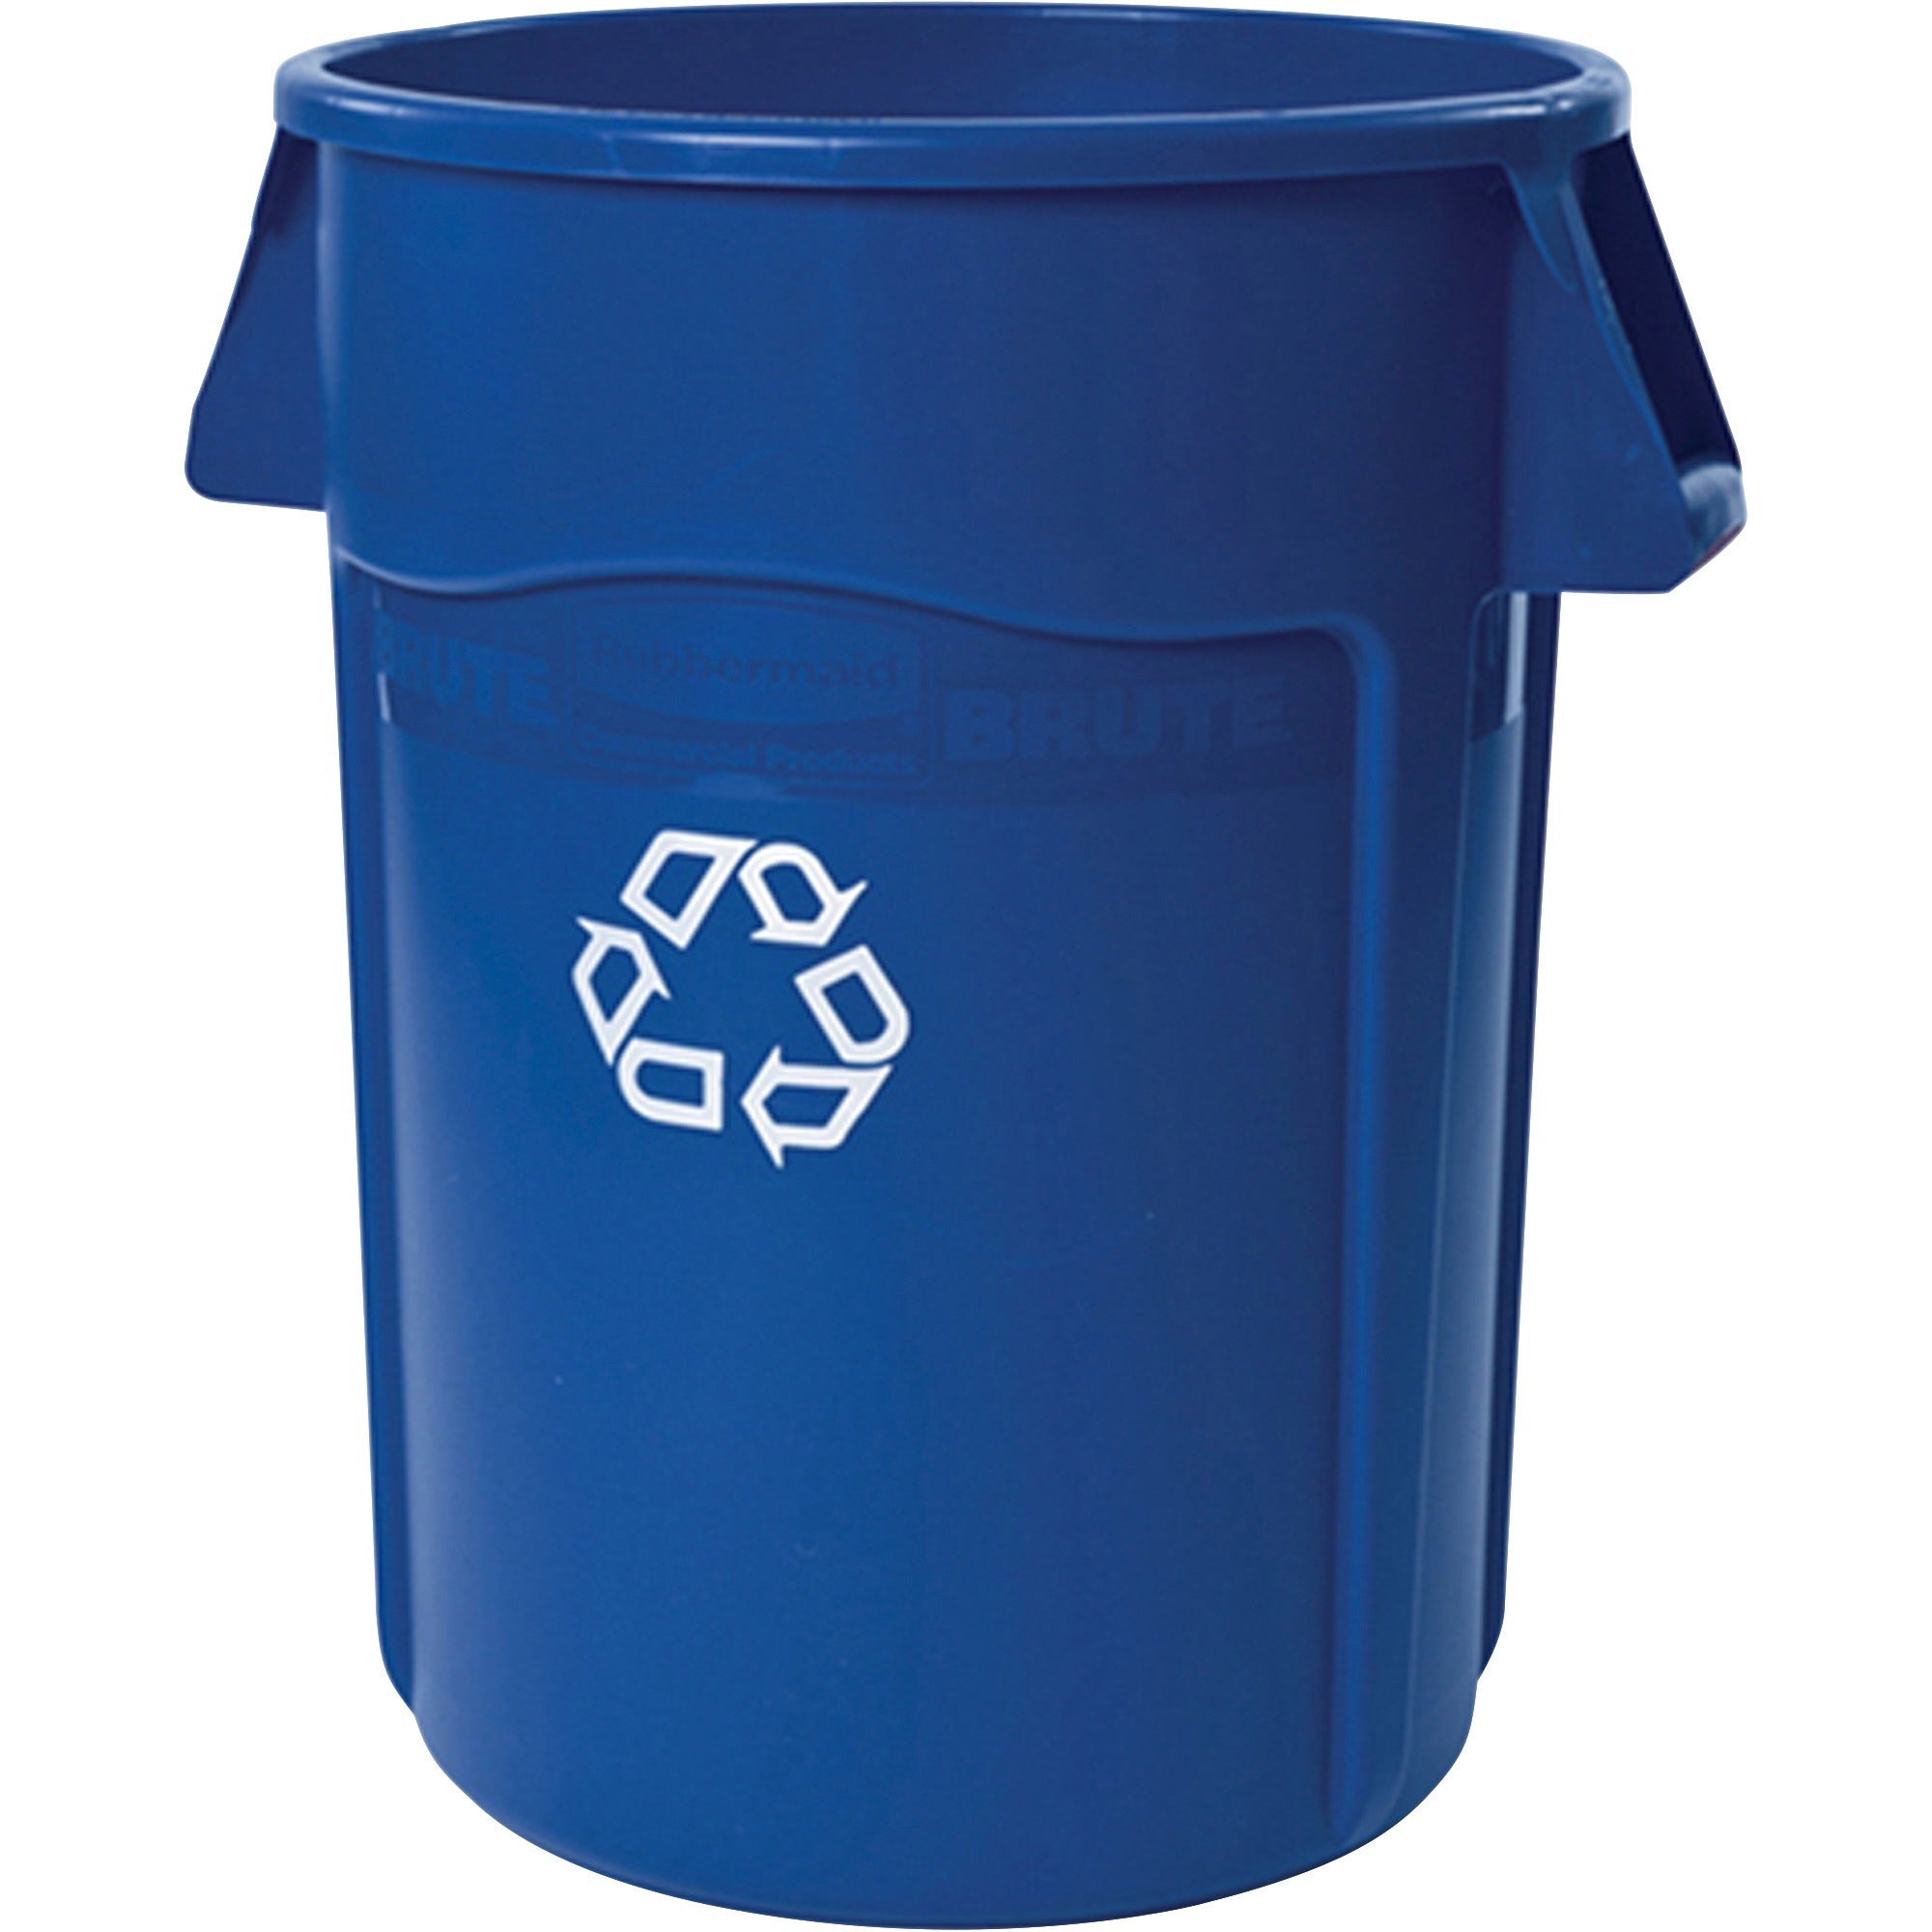 rubbermaid-commercial-brute-44-gallon-vented-recycling-containers_rcp264307bluct - 1